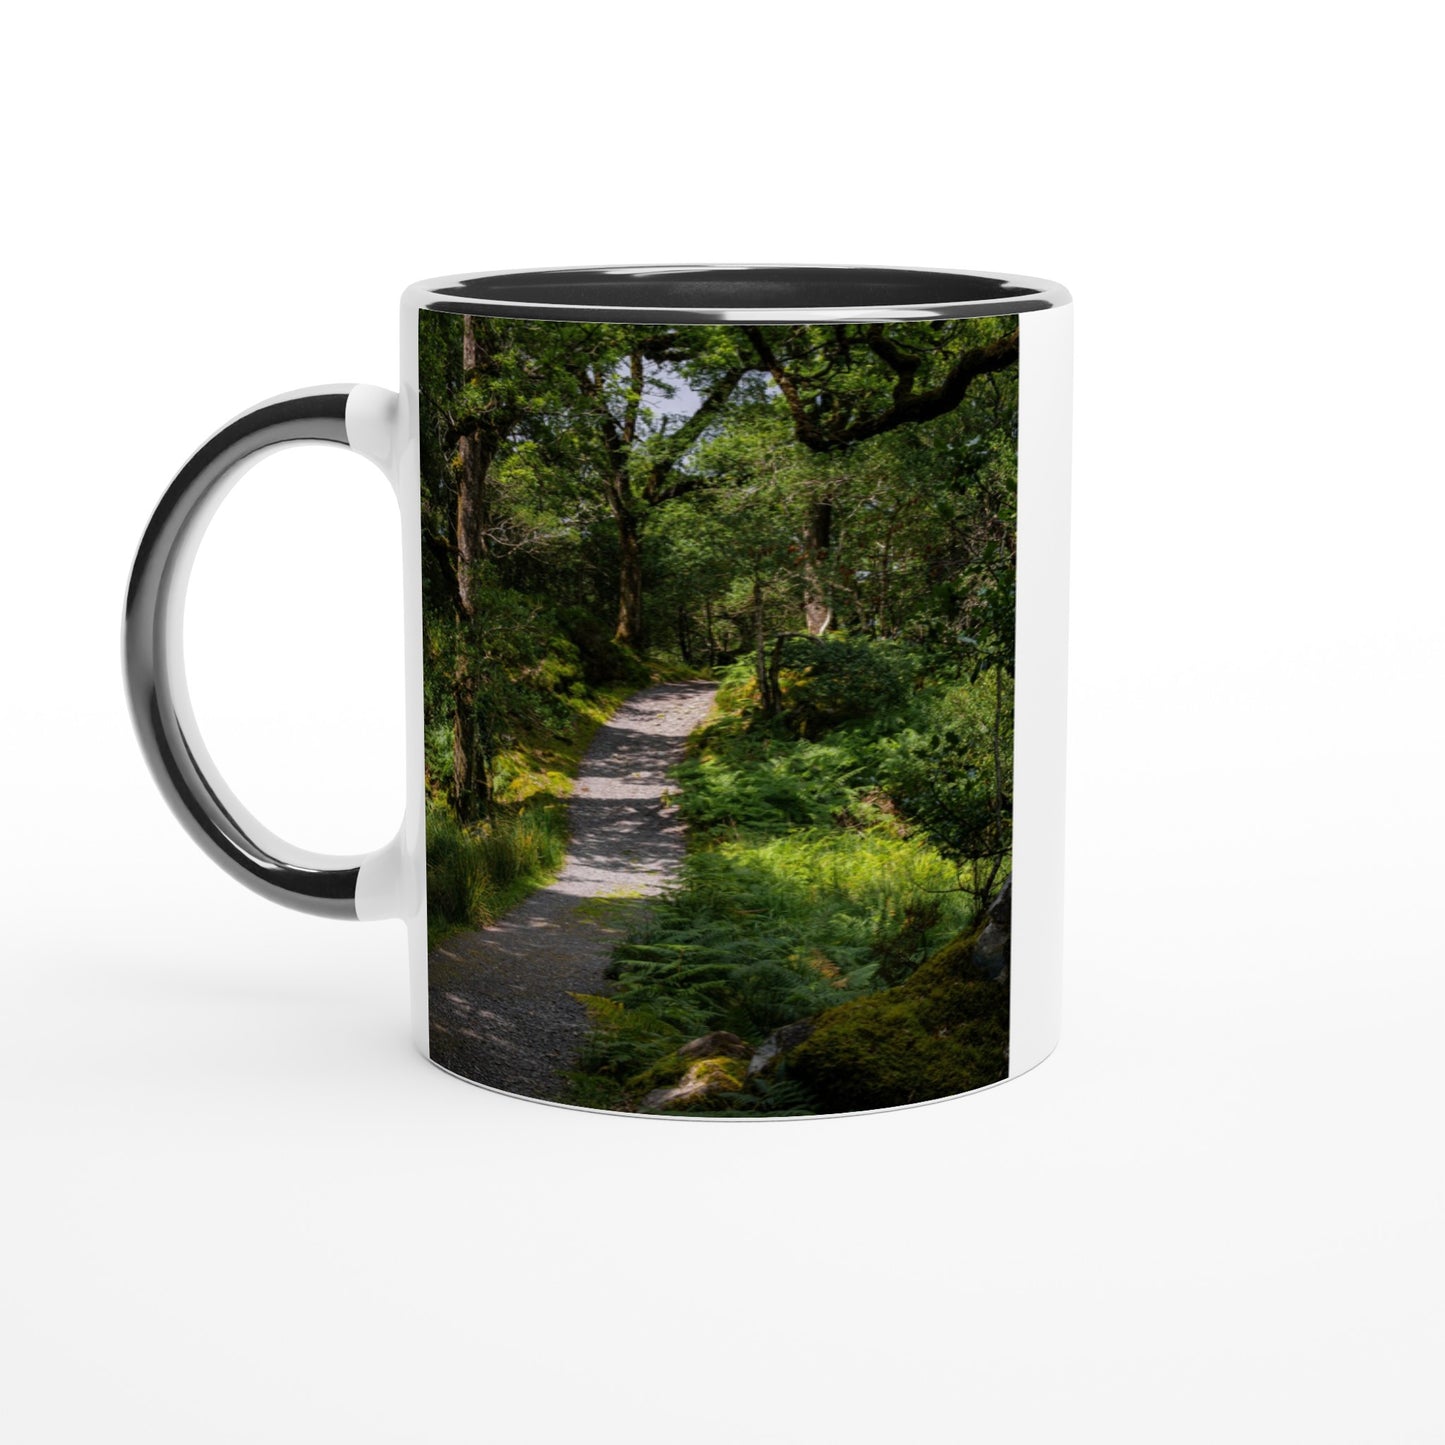 Forest path in the countryside ceramic mug - various colors